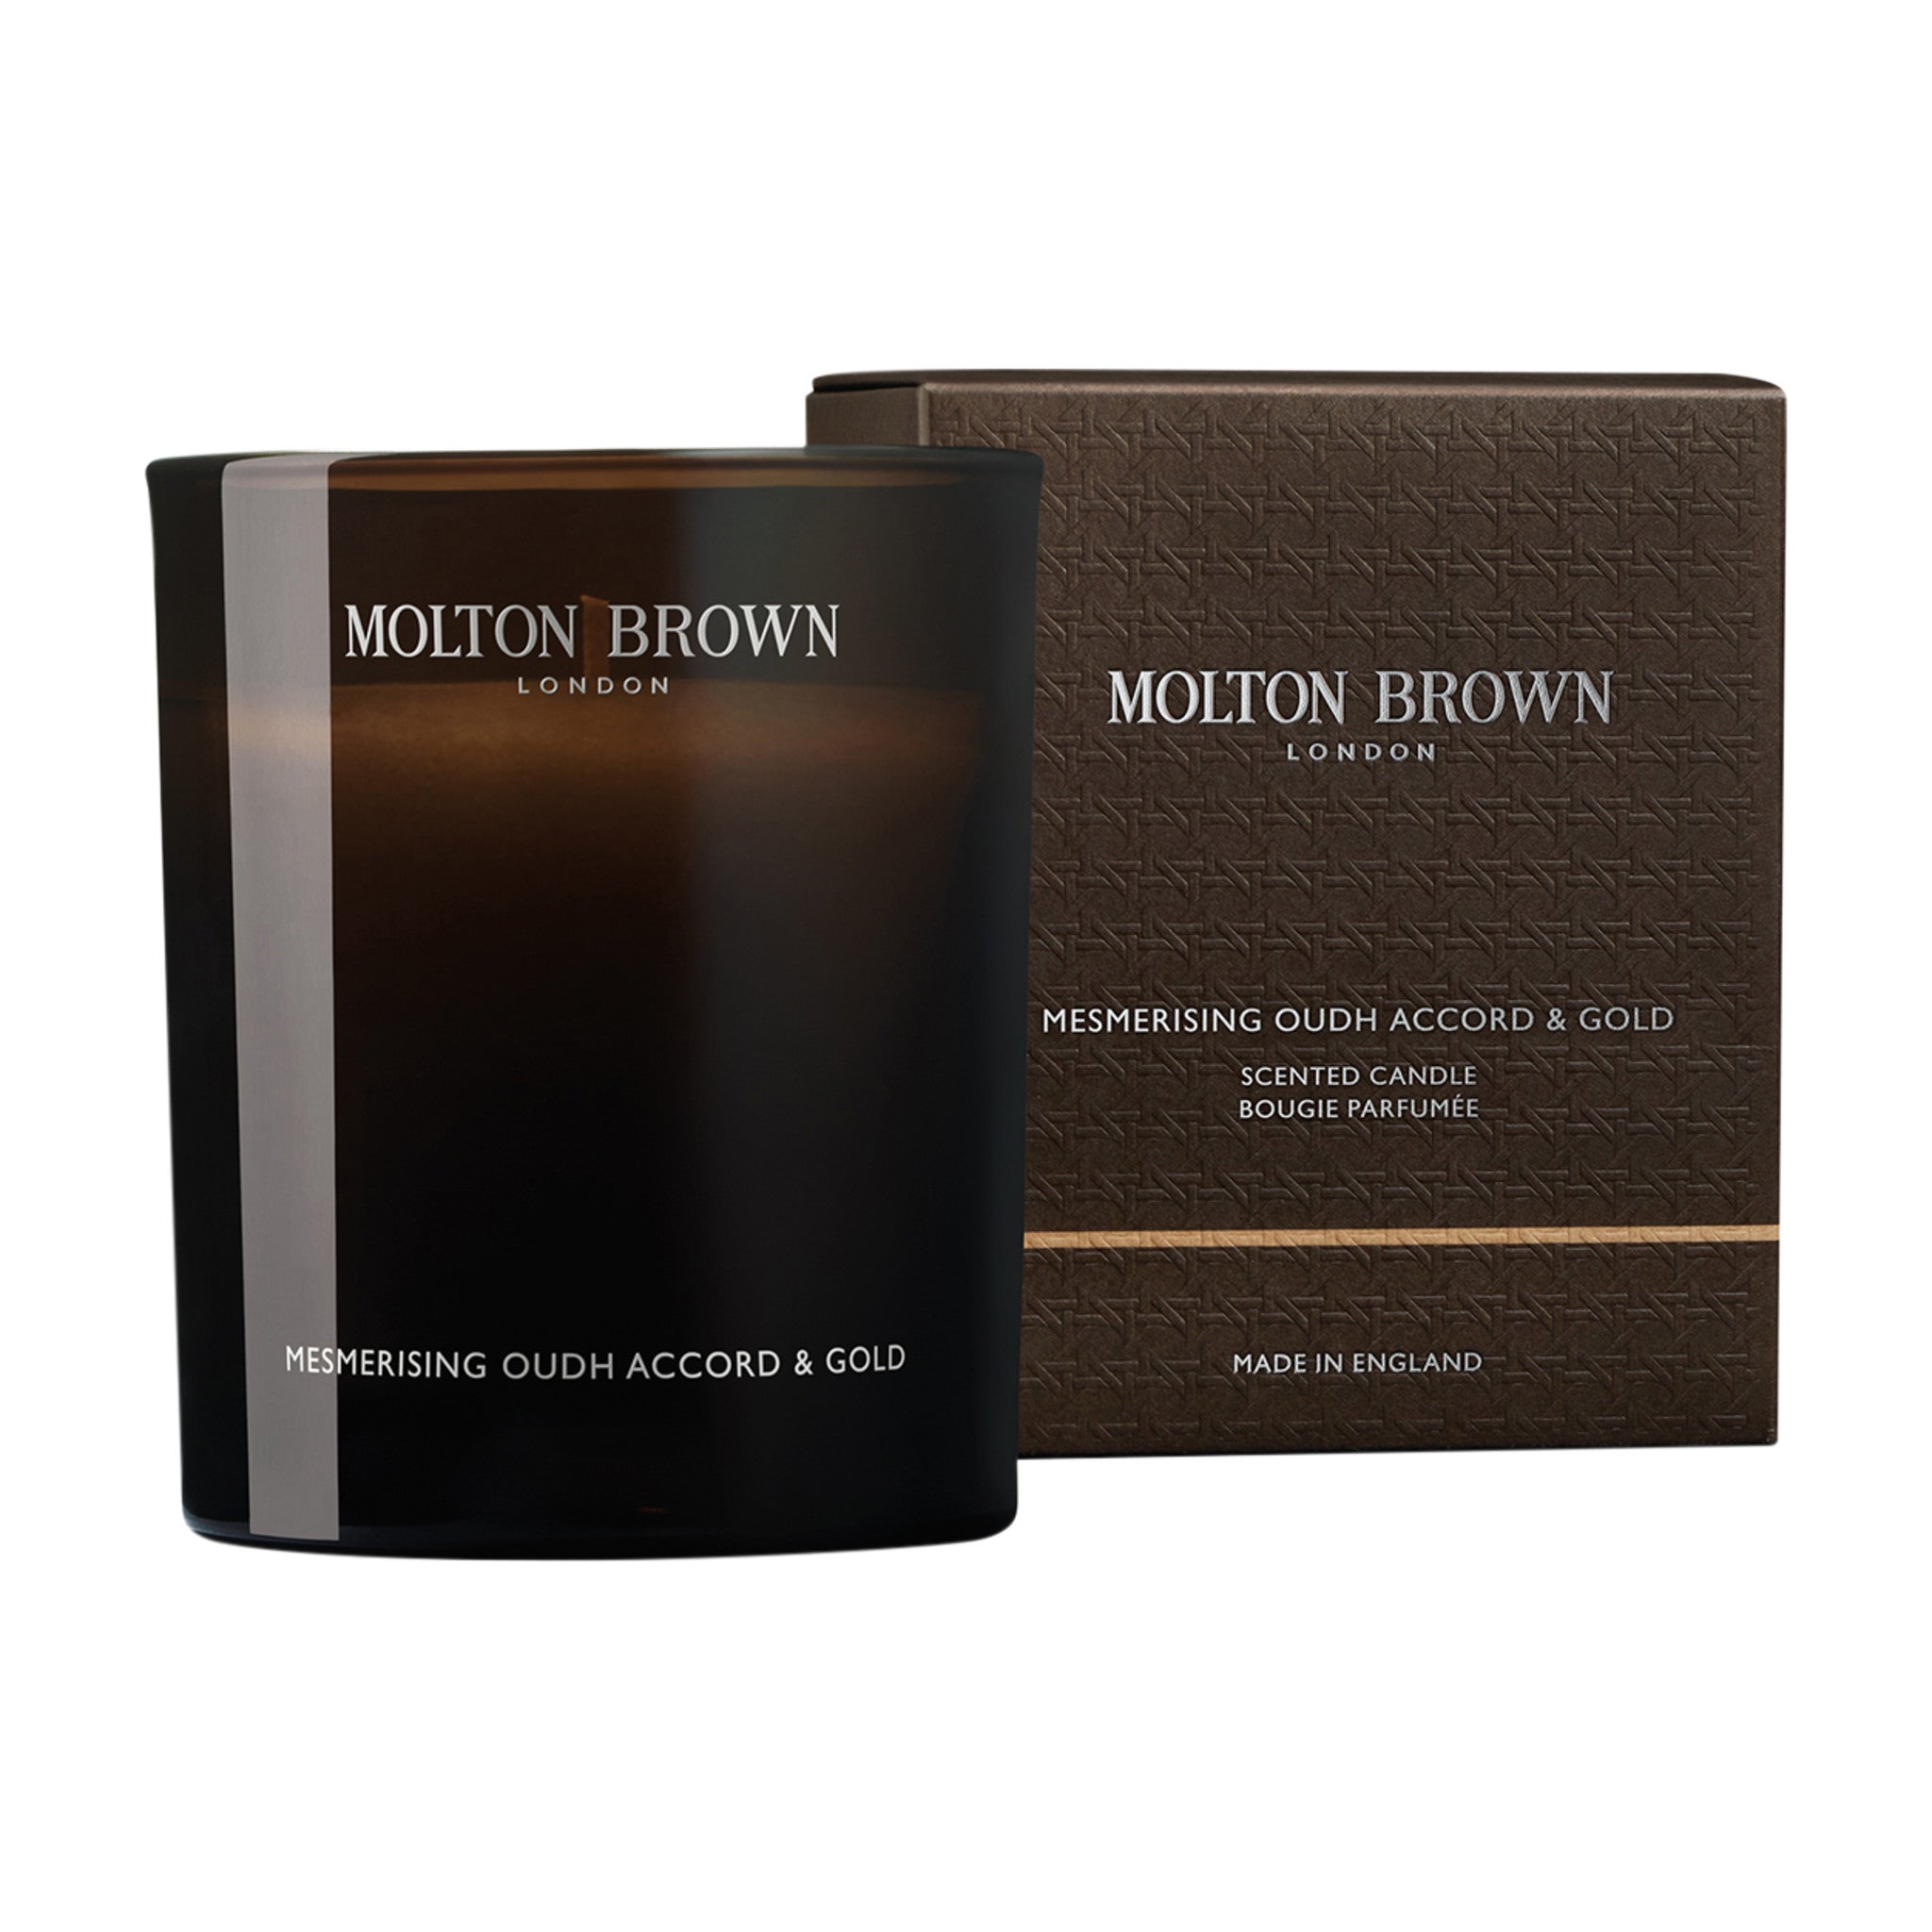 Molton Brown Mesmerizing Oudh Accord and Gold Candle Size variant: 6.7 oz (Signature) main image.